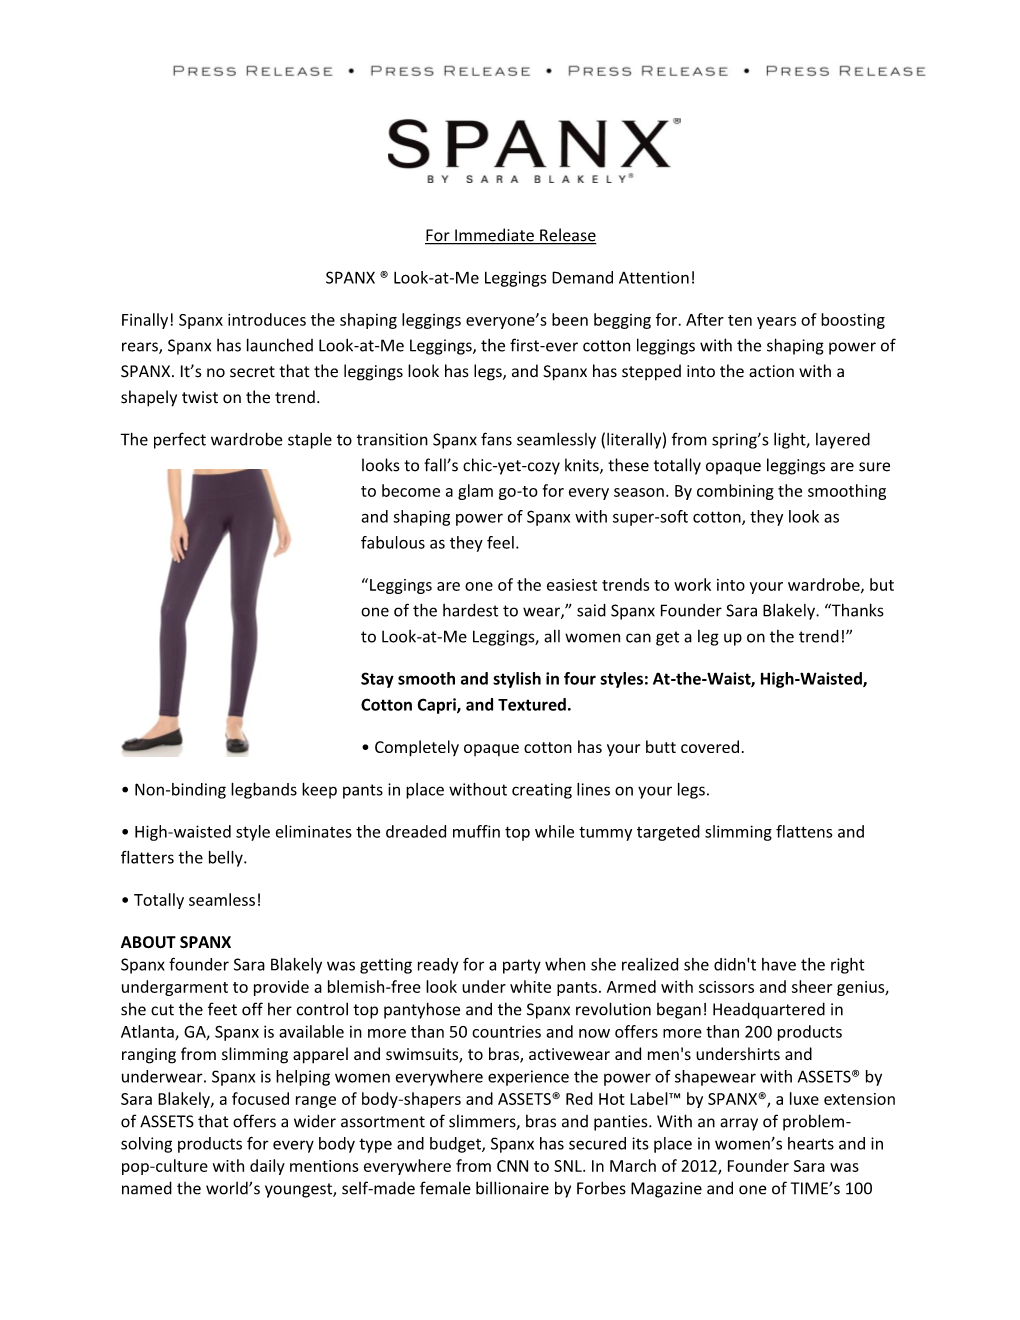 Spanx Introduces the Shaping Leggings Everyone's